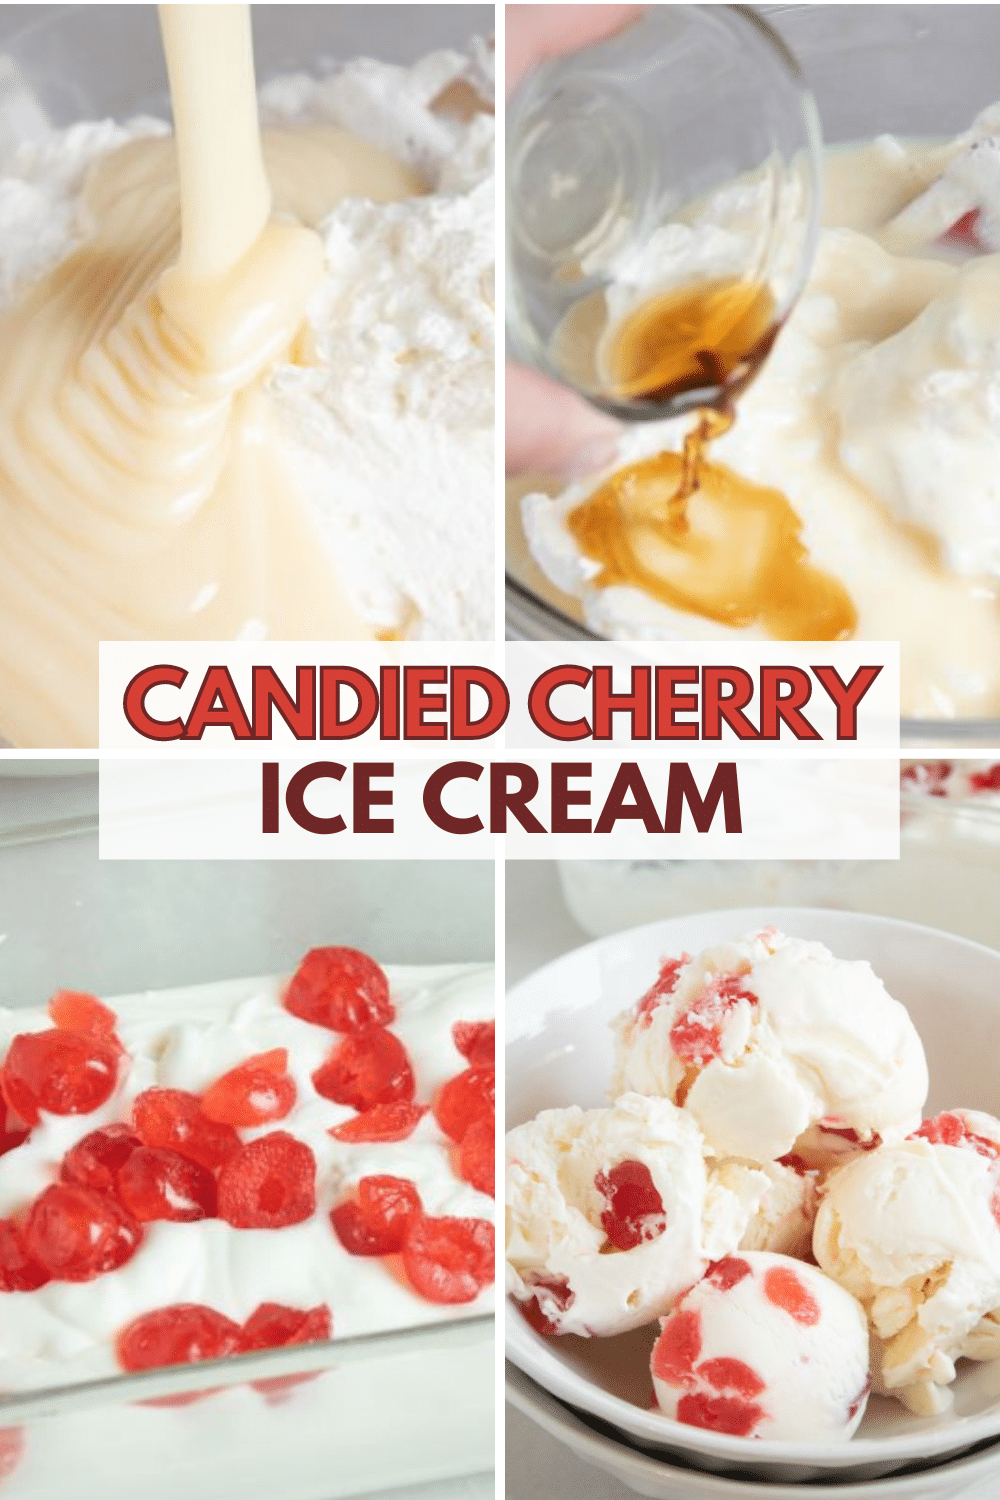 Homemade candied cherry ice cream is a simple no churn ice cream recipe using sweetened condensed milk and heavy cream. Candied cherries add a sweet treat. #homemadeicecream #nochurnicecream #candiedcherries via @wondermomwannab